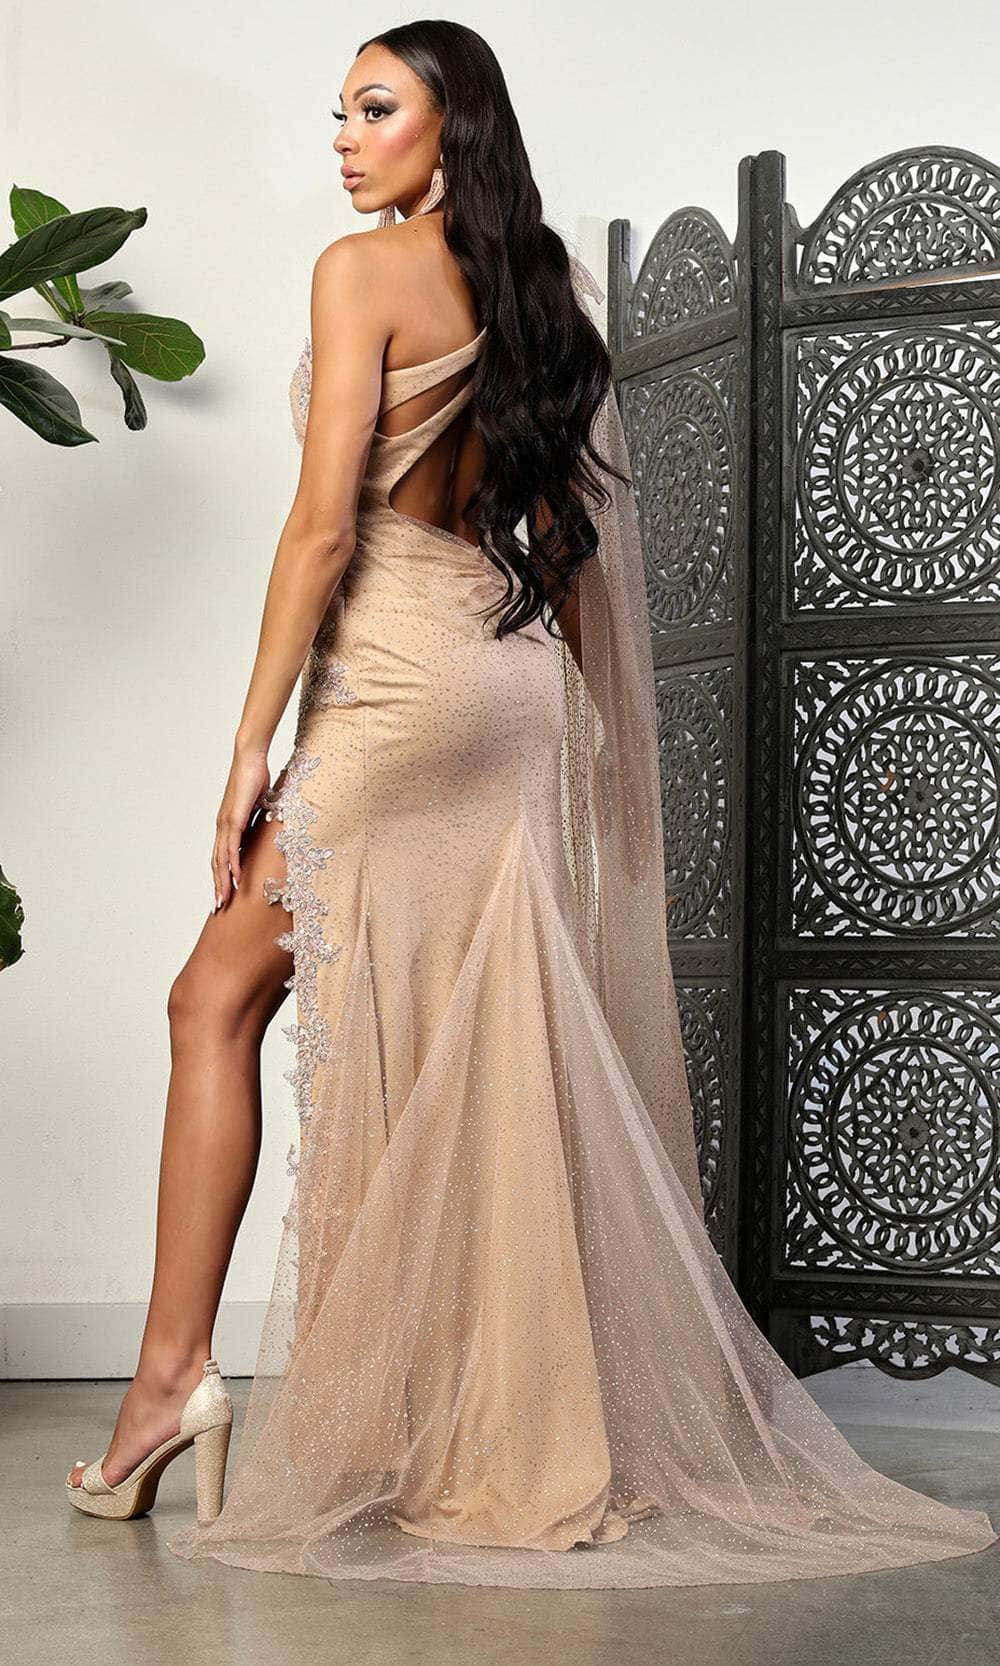 May Queen MQ2022 - One Shoulder Prom Gown with Cape Evening Dresses